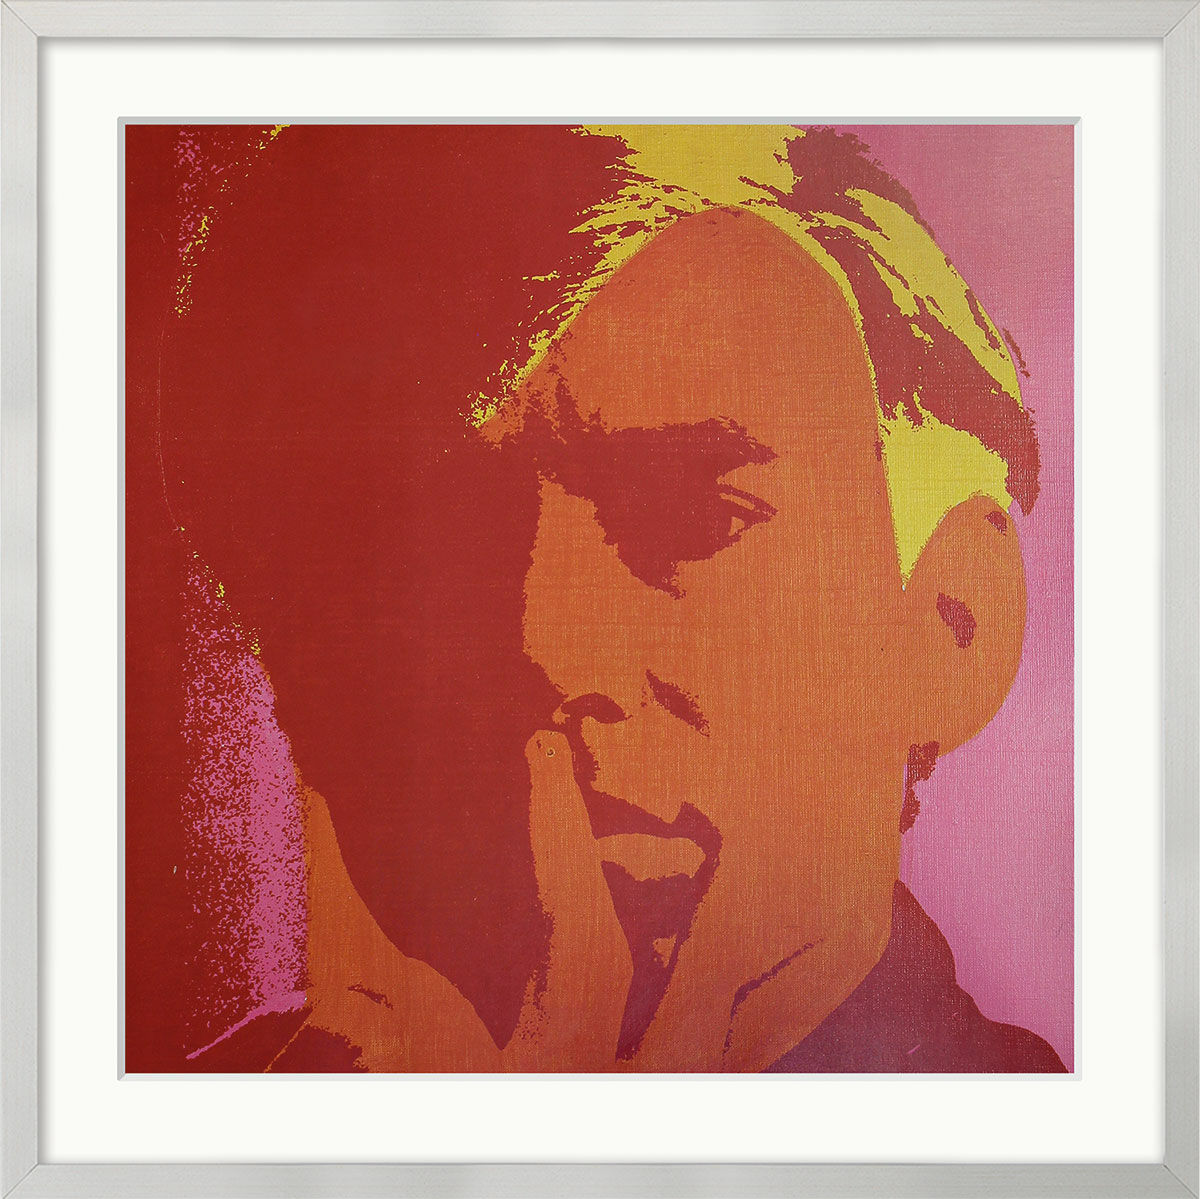 Picture "Self-Portrait" (1993), framed by Andy Warhol